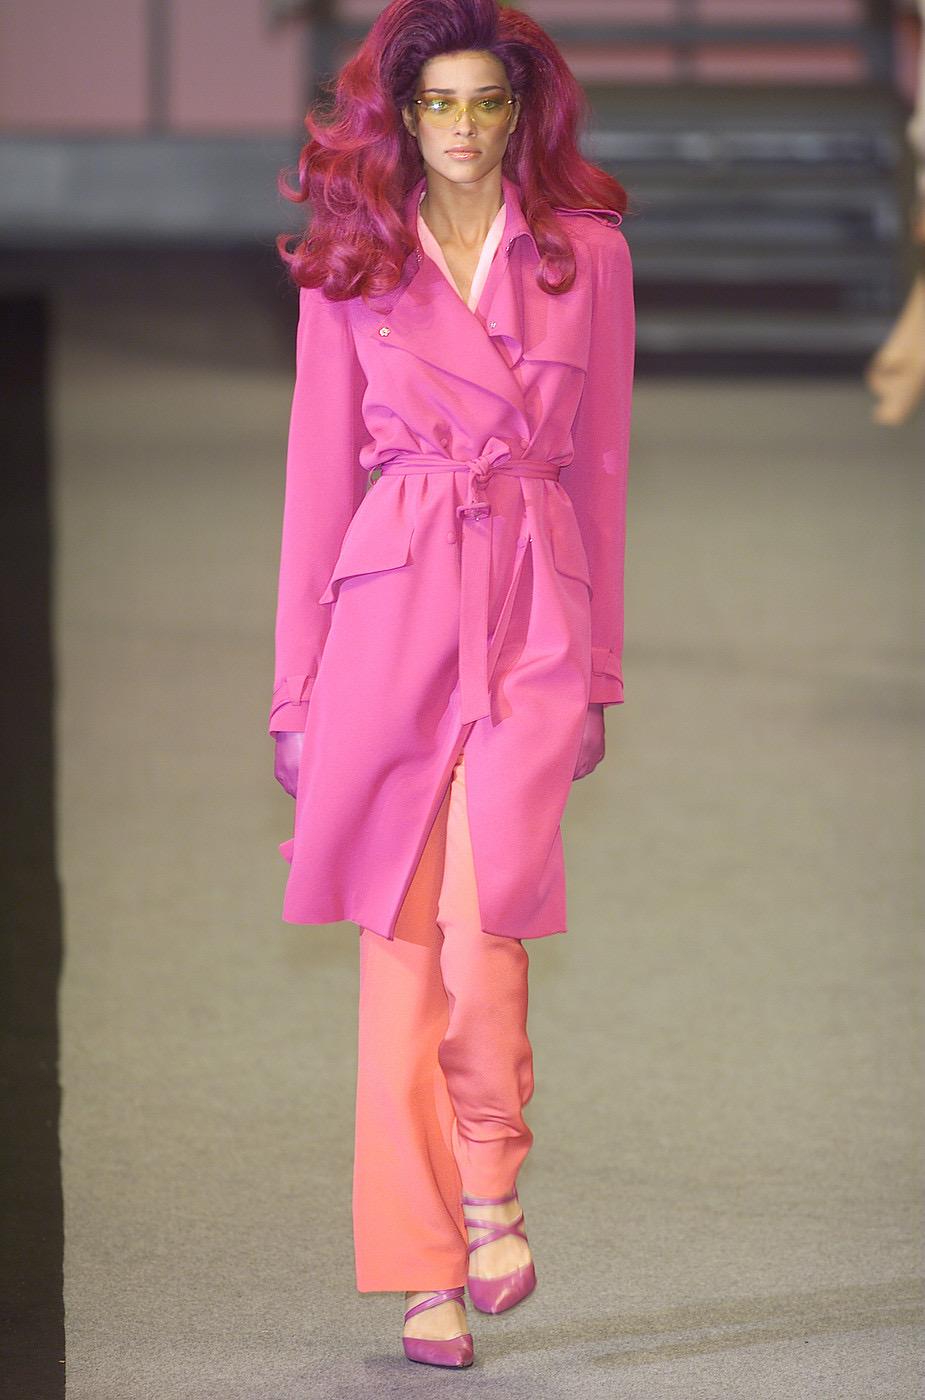 Presenting a hot, hot pink Thierry Mugler Couture trench coat from Manfried Thierry Mugler's final collection before his retirement, the Fall/Winter 2001 